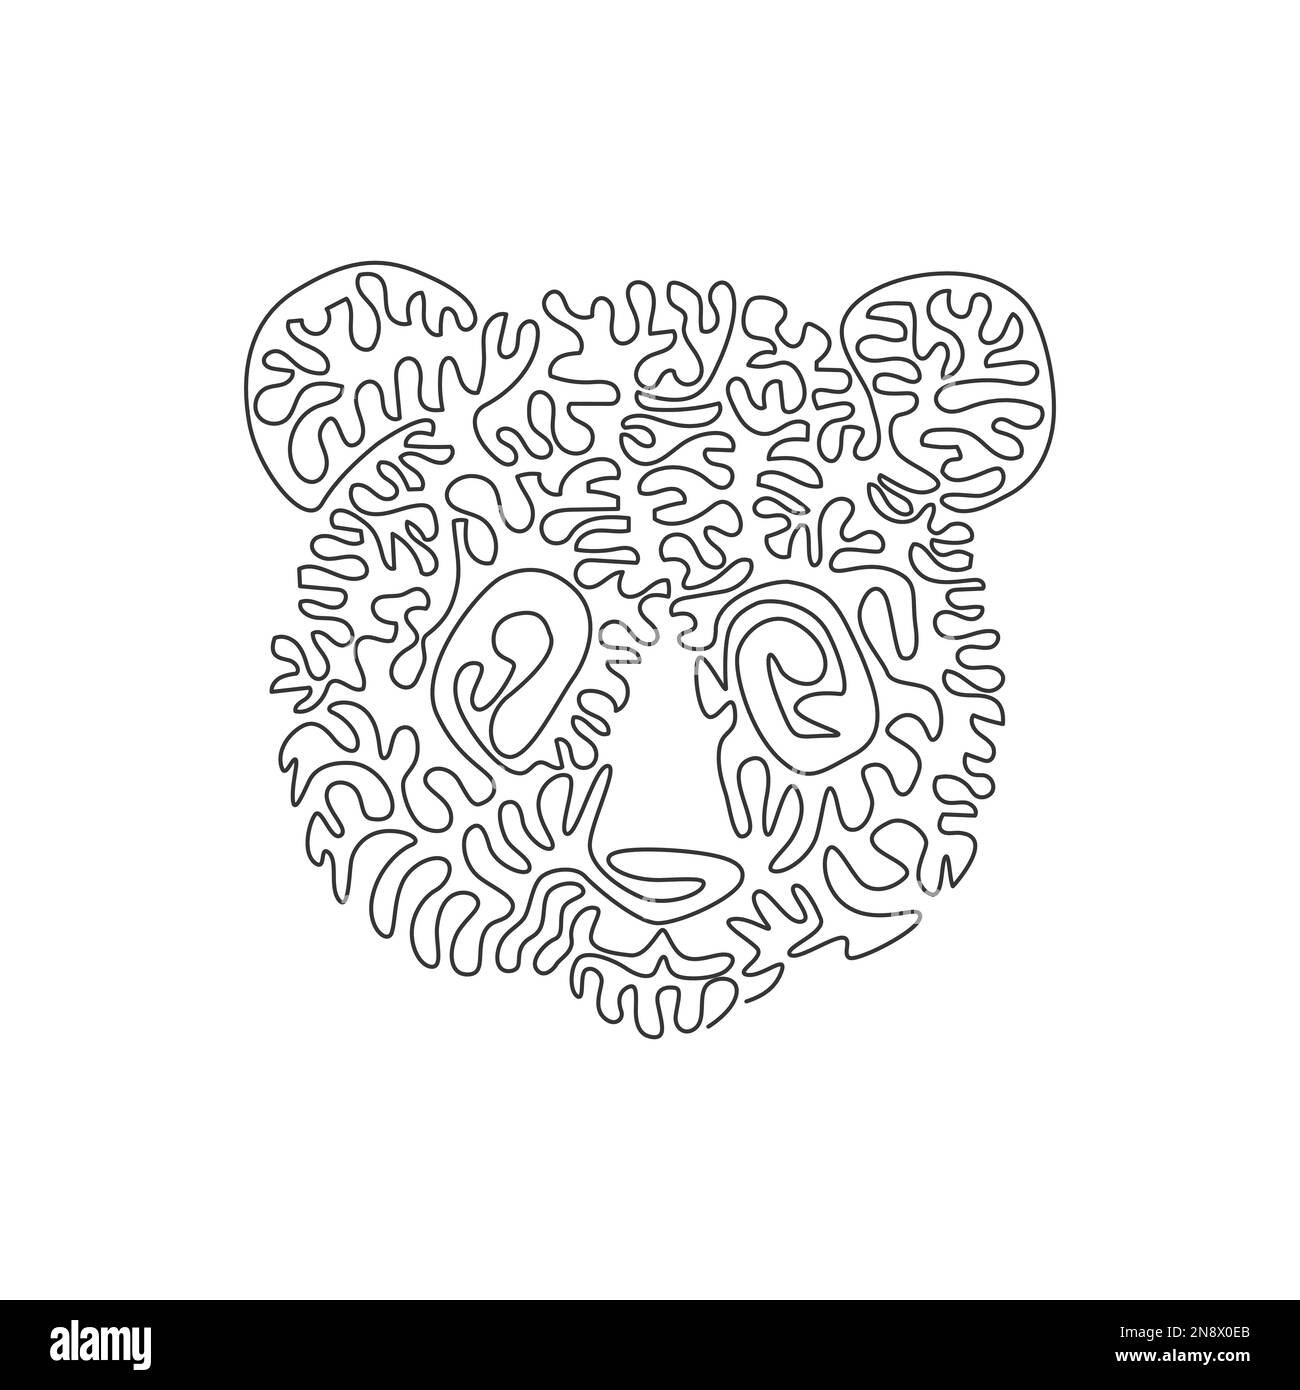 Single swirl continuous line drawing of big panda abstract art. Continuous line drawing graphic design vector illustration style of adorable panda Stock Vector